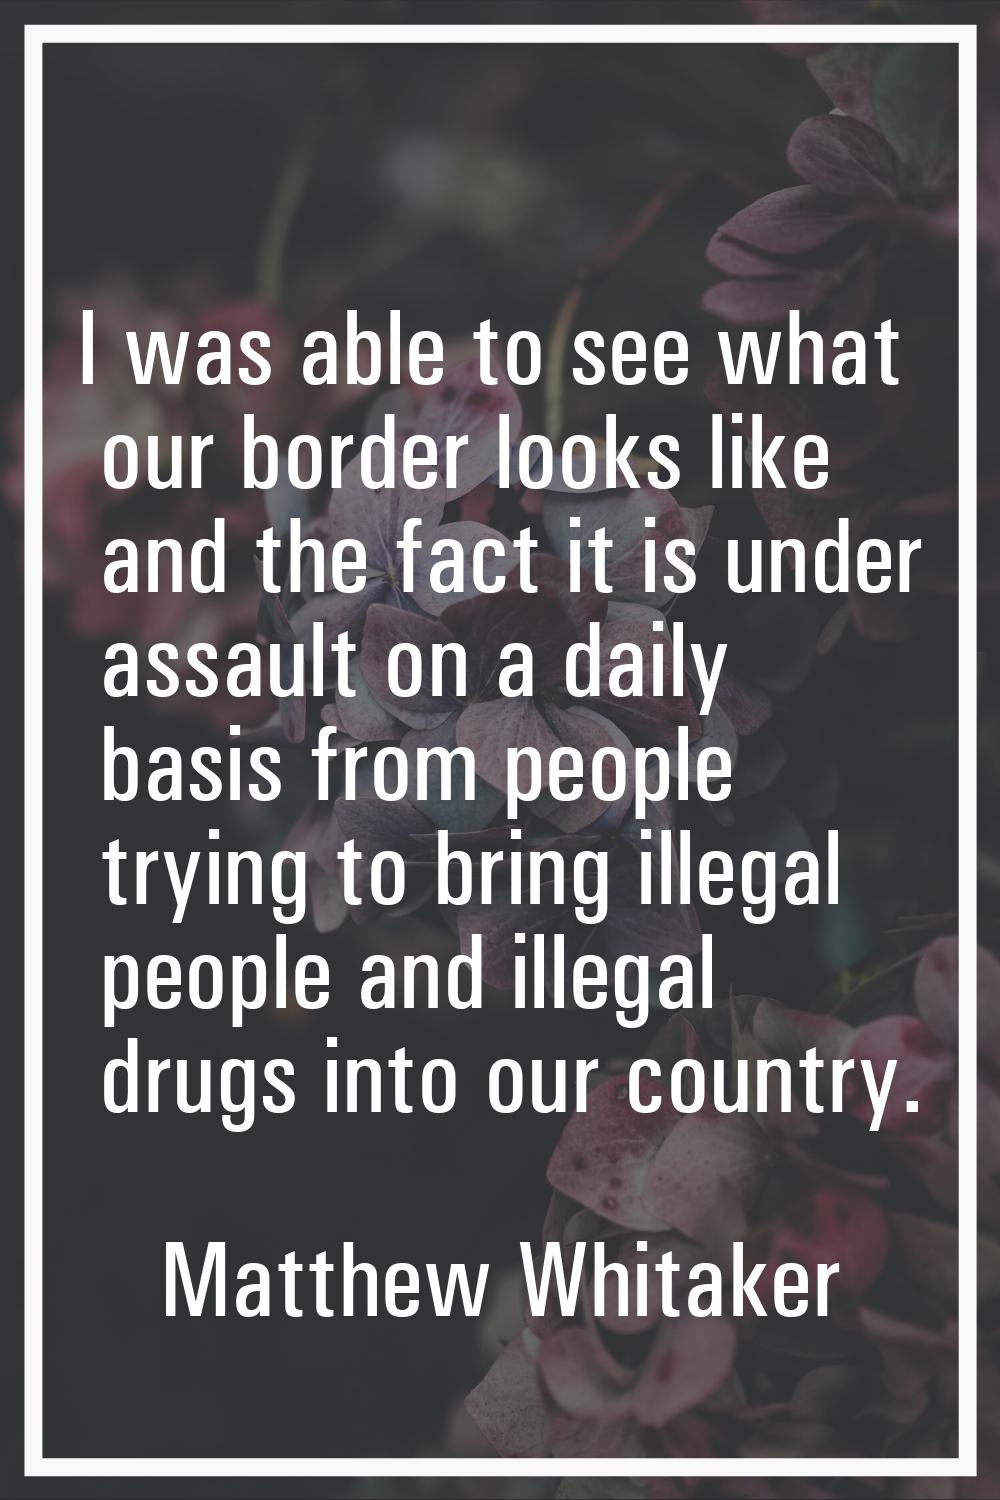 I was able to see what our border looks like and the fact it is under assault on a daily basis from